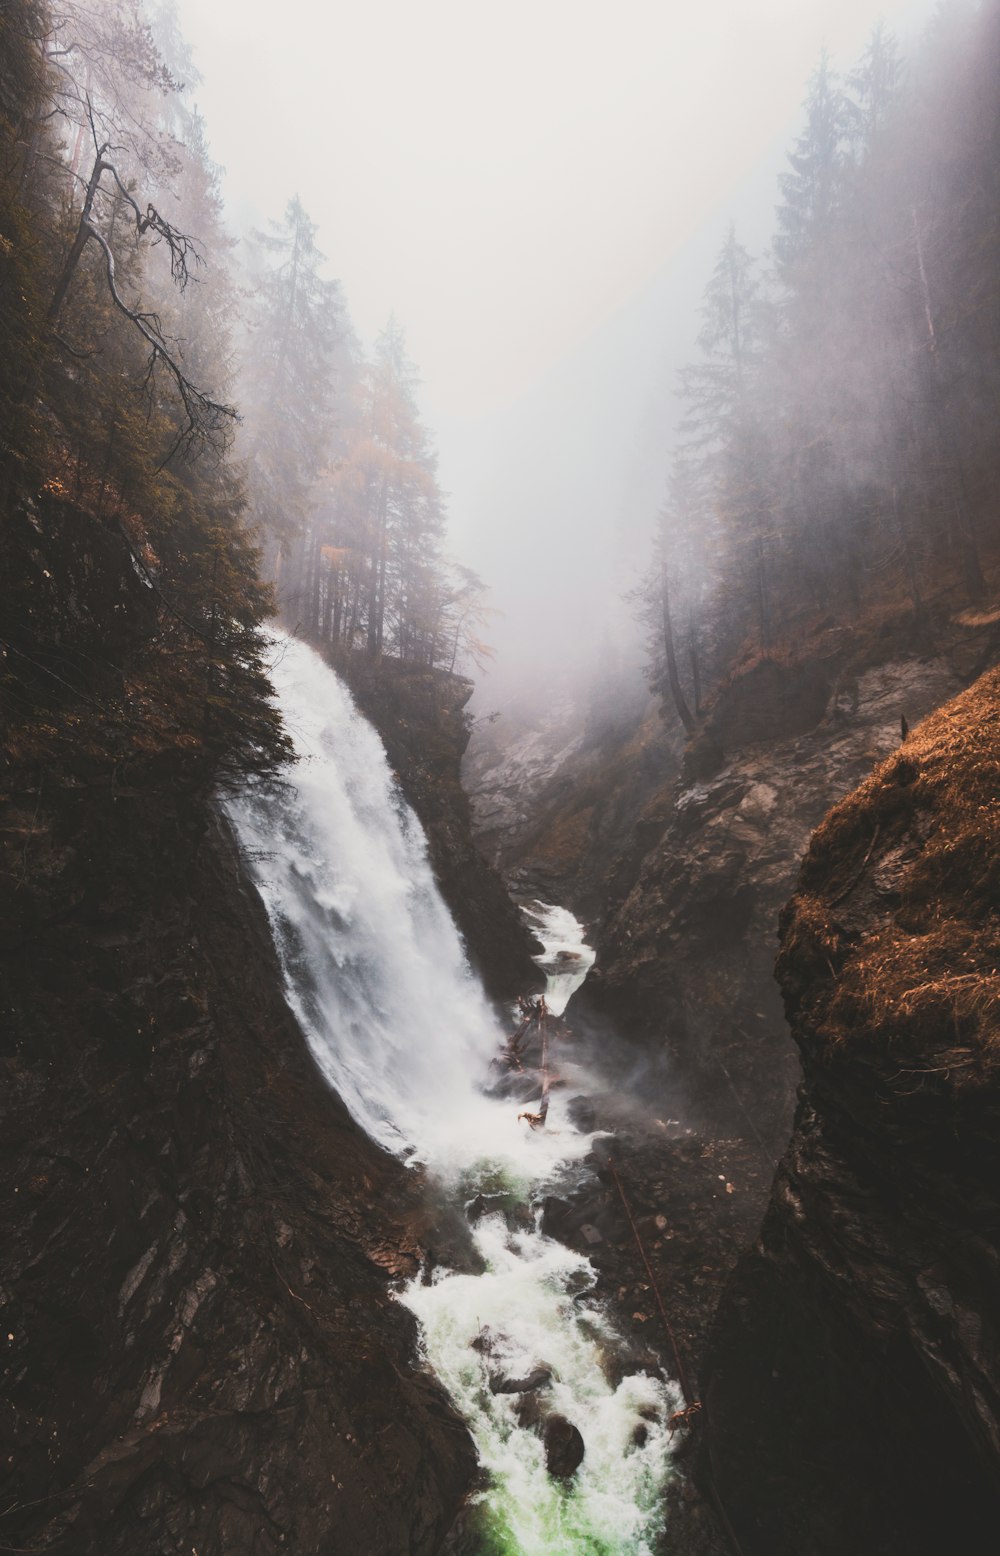 fog surrounding forest with waterfalls